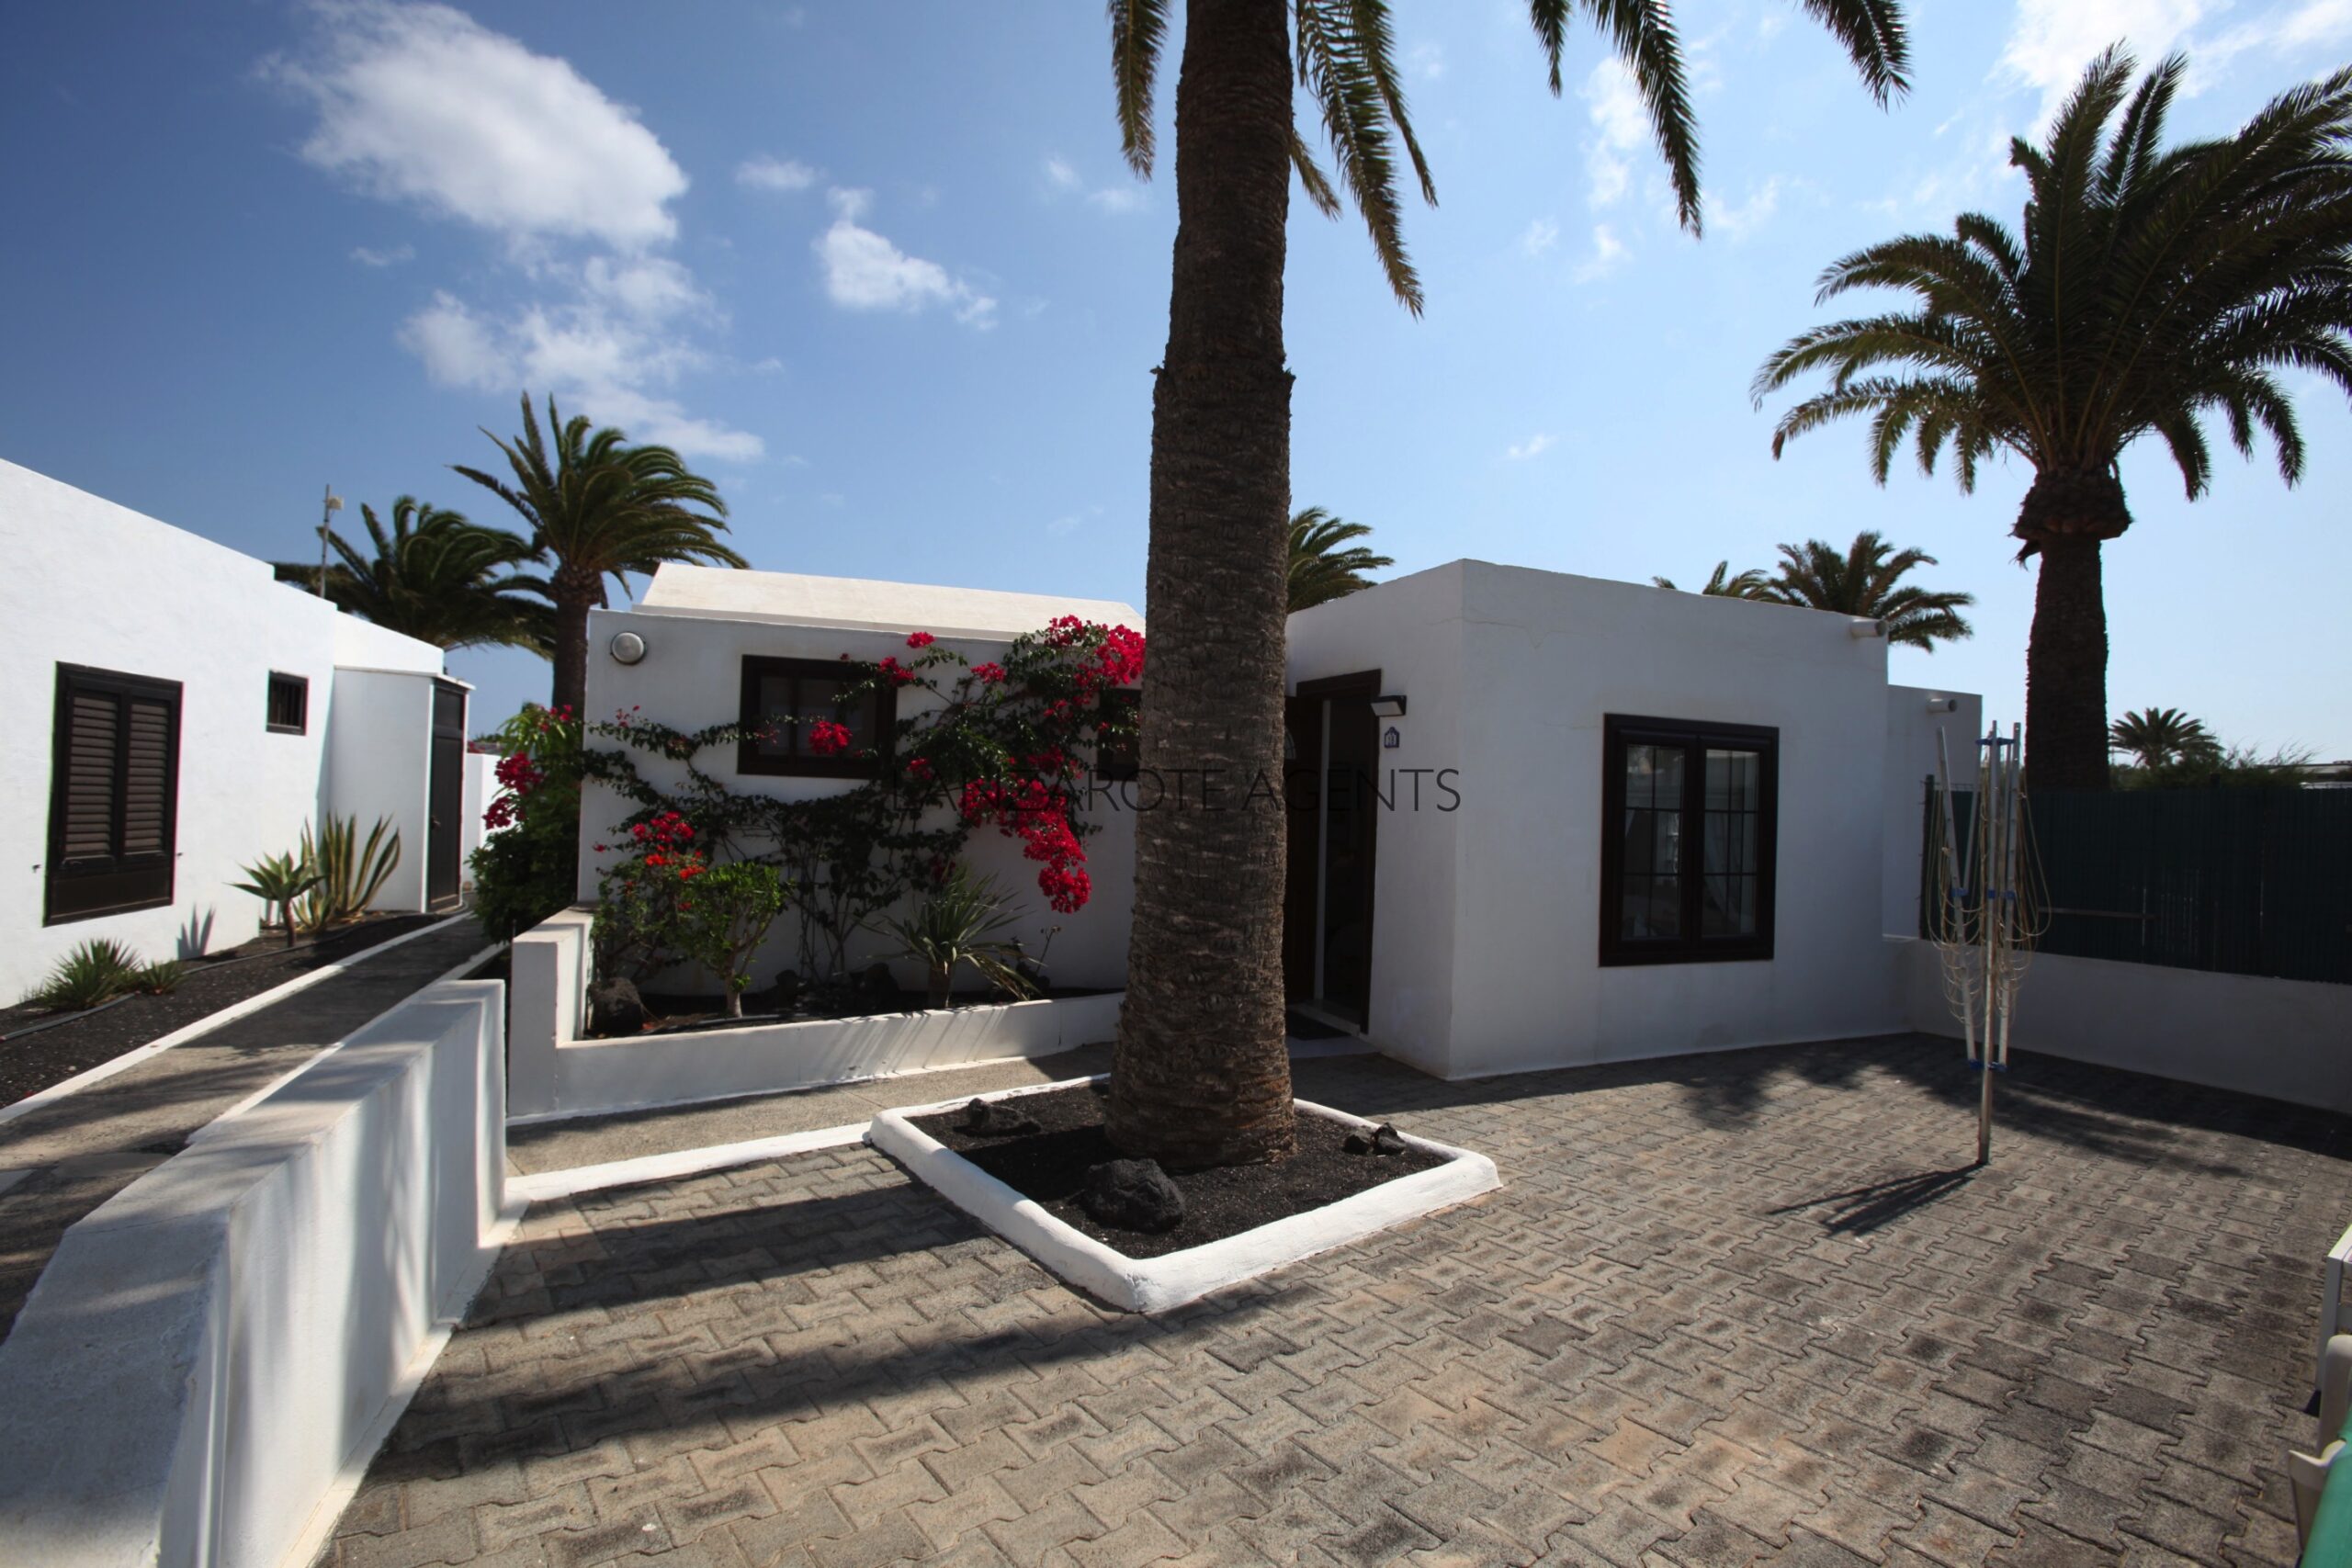 REDUCE PRICE ! Fabulous Semidetached 3 Bedroom Bungalow in the Heart of Playa Blanca in Complex With Communal Pool and at 2 min Walk To the Sea Promenade and all Conveniences